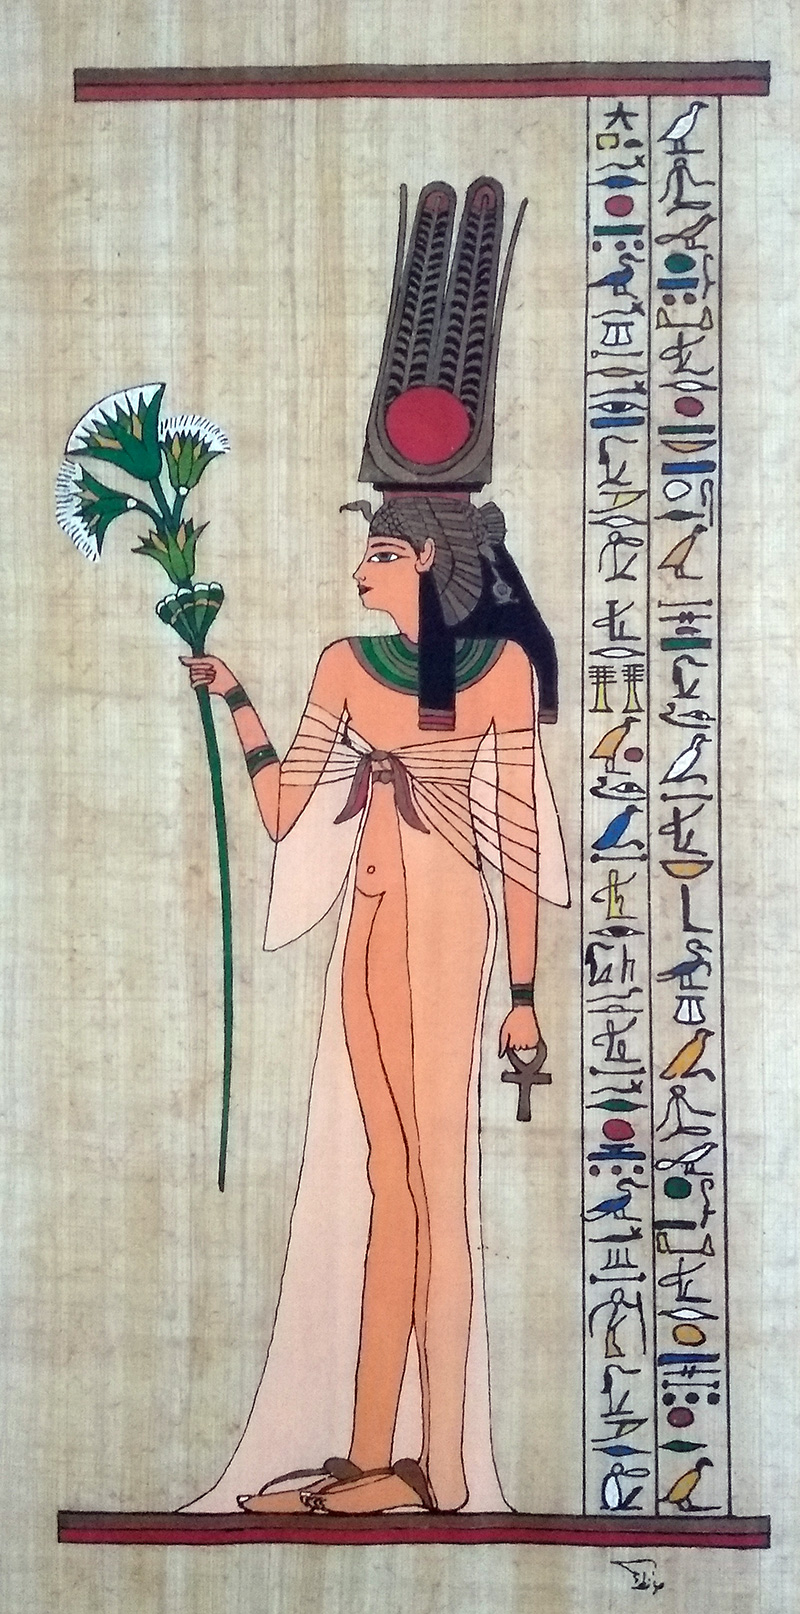 The deity Isis or Aset with papyrus staff, ankh, and plumed sun-headdress. Ink on papyrus. Source: author's library.